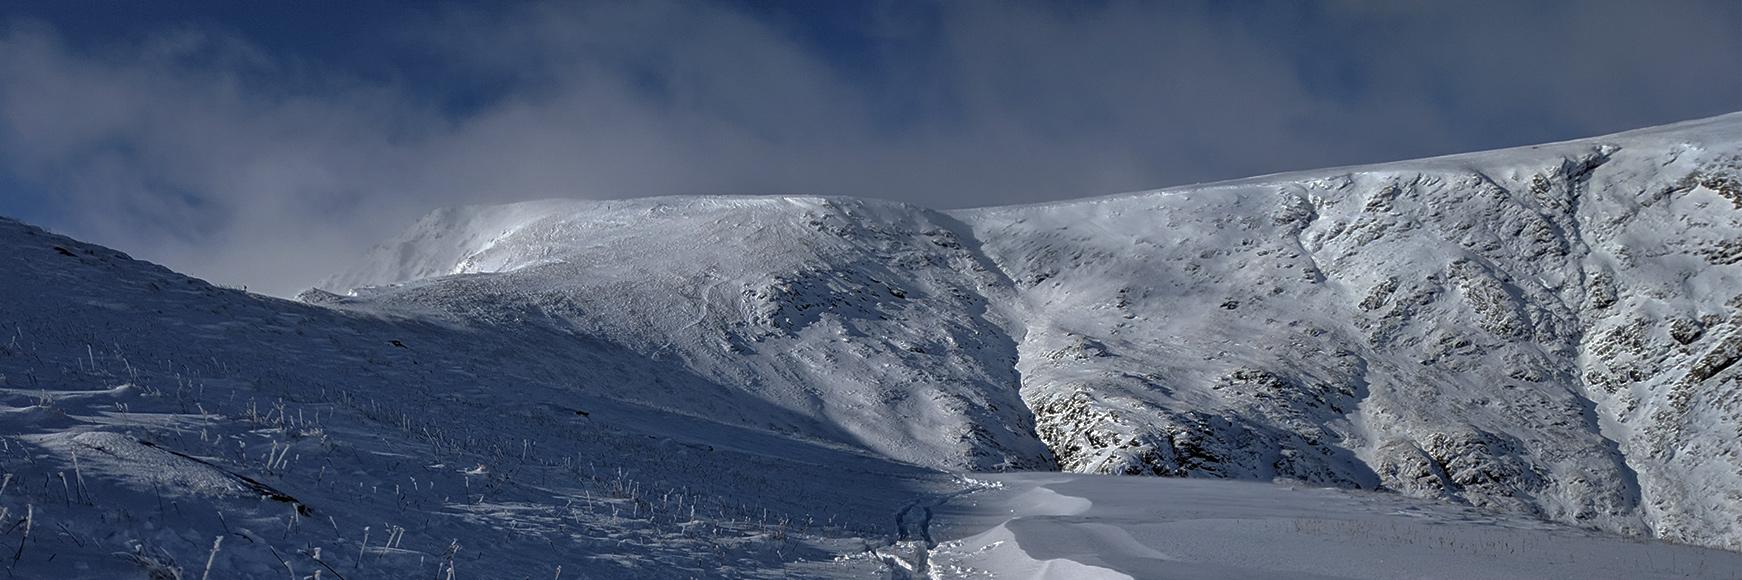 Skiing in the Lake District banner image